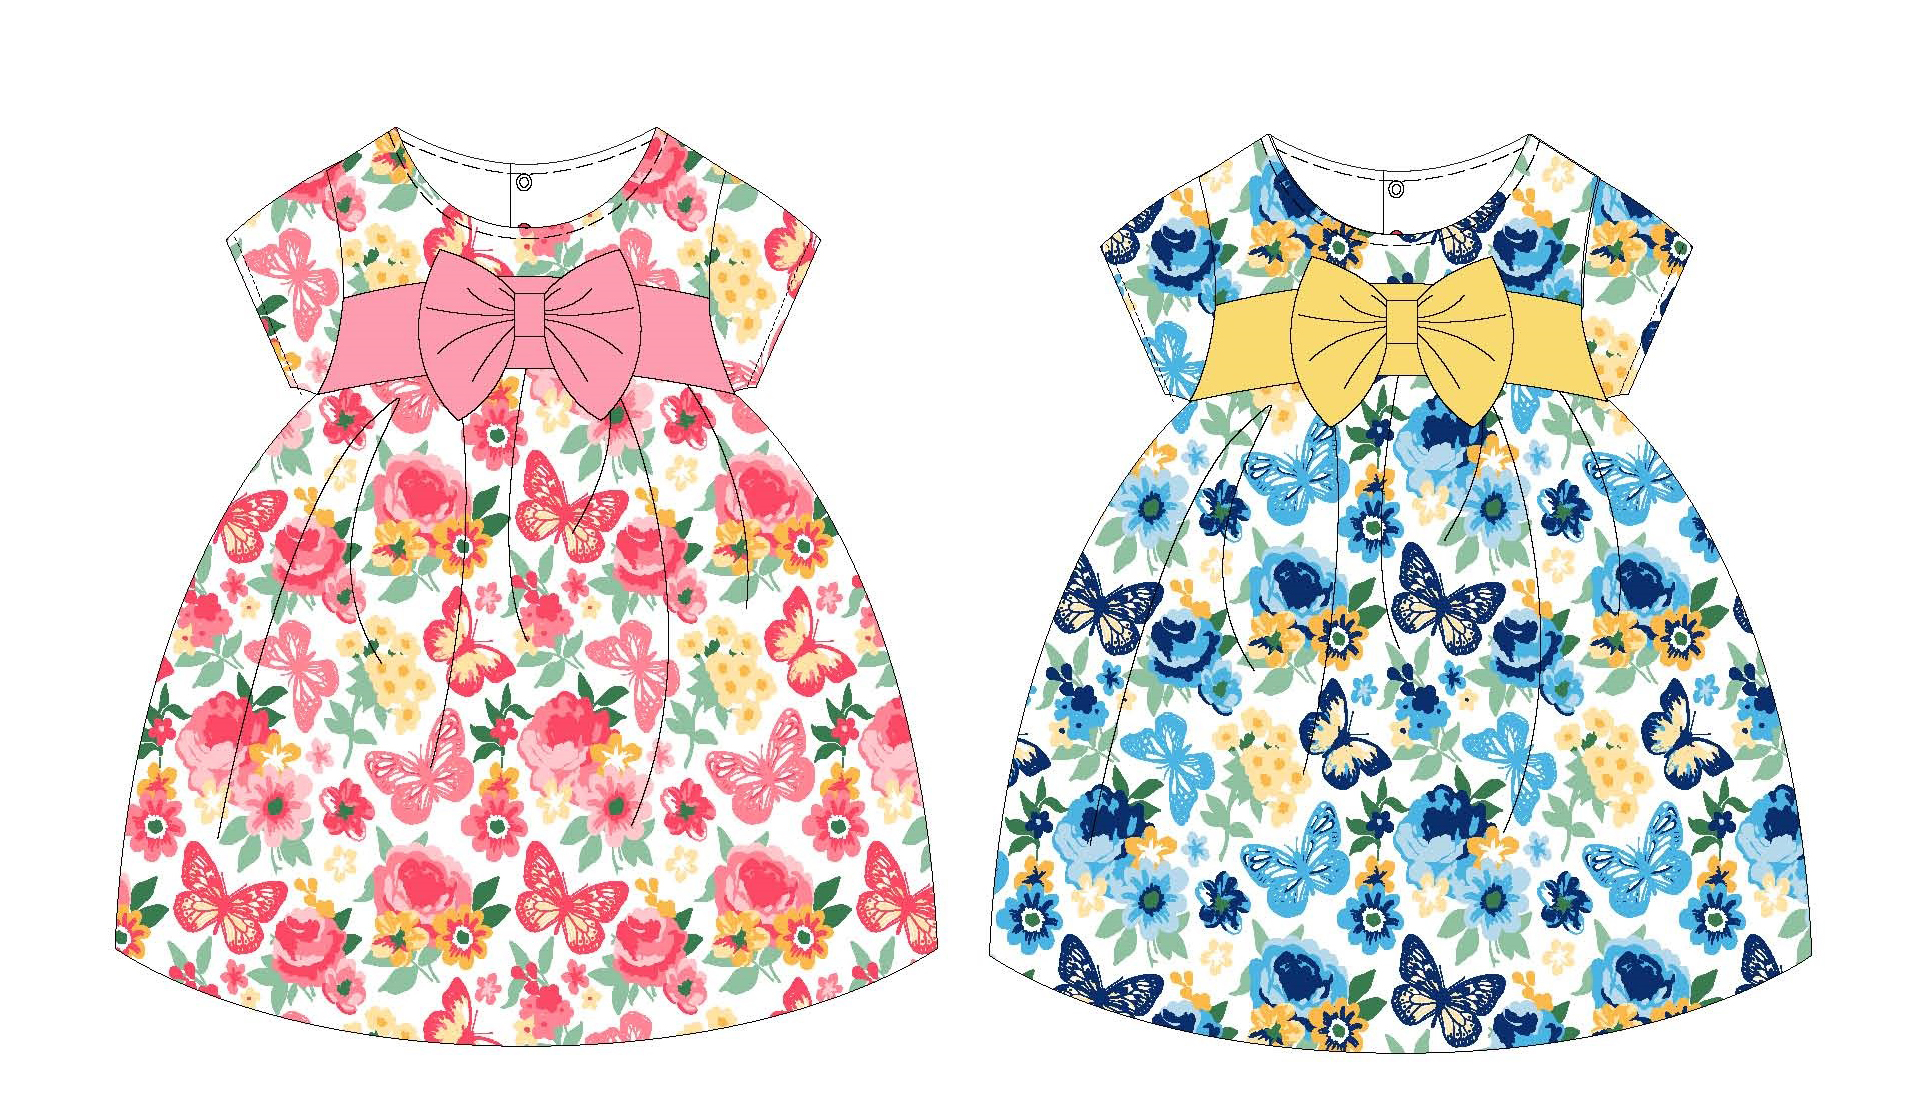 Infant Girl's Knit Printed Dresses w/ Embroidered Ribbon Bow & Butterfly Print - Sizes 0/3M-9M